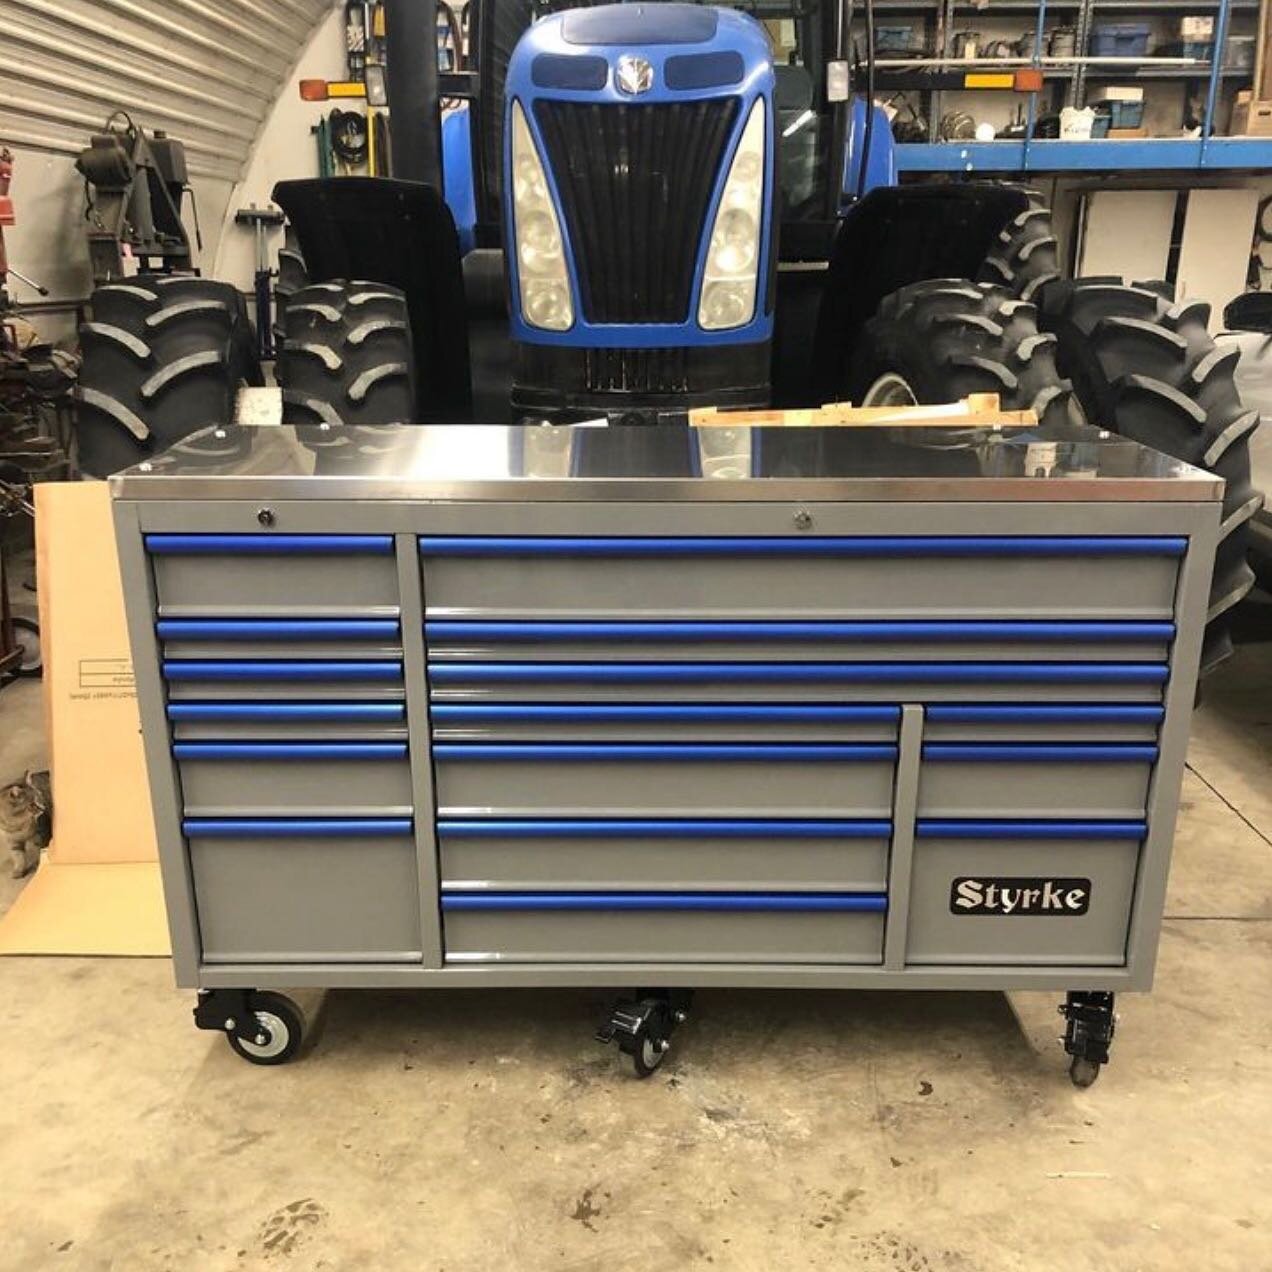 Darcy&rsquo;s new 72&rdquo; is looking right at homie in his shop! 👌
&bull;
&bull;
&bull;
#shop #garage #toolchest #toolbox #toolcart #stainlesssteel #anodizedaluminum #mechanic #tool #heavyduty #heavyequipment #agtech #agmechanic #autotech #automec